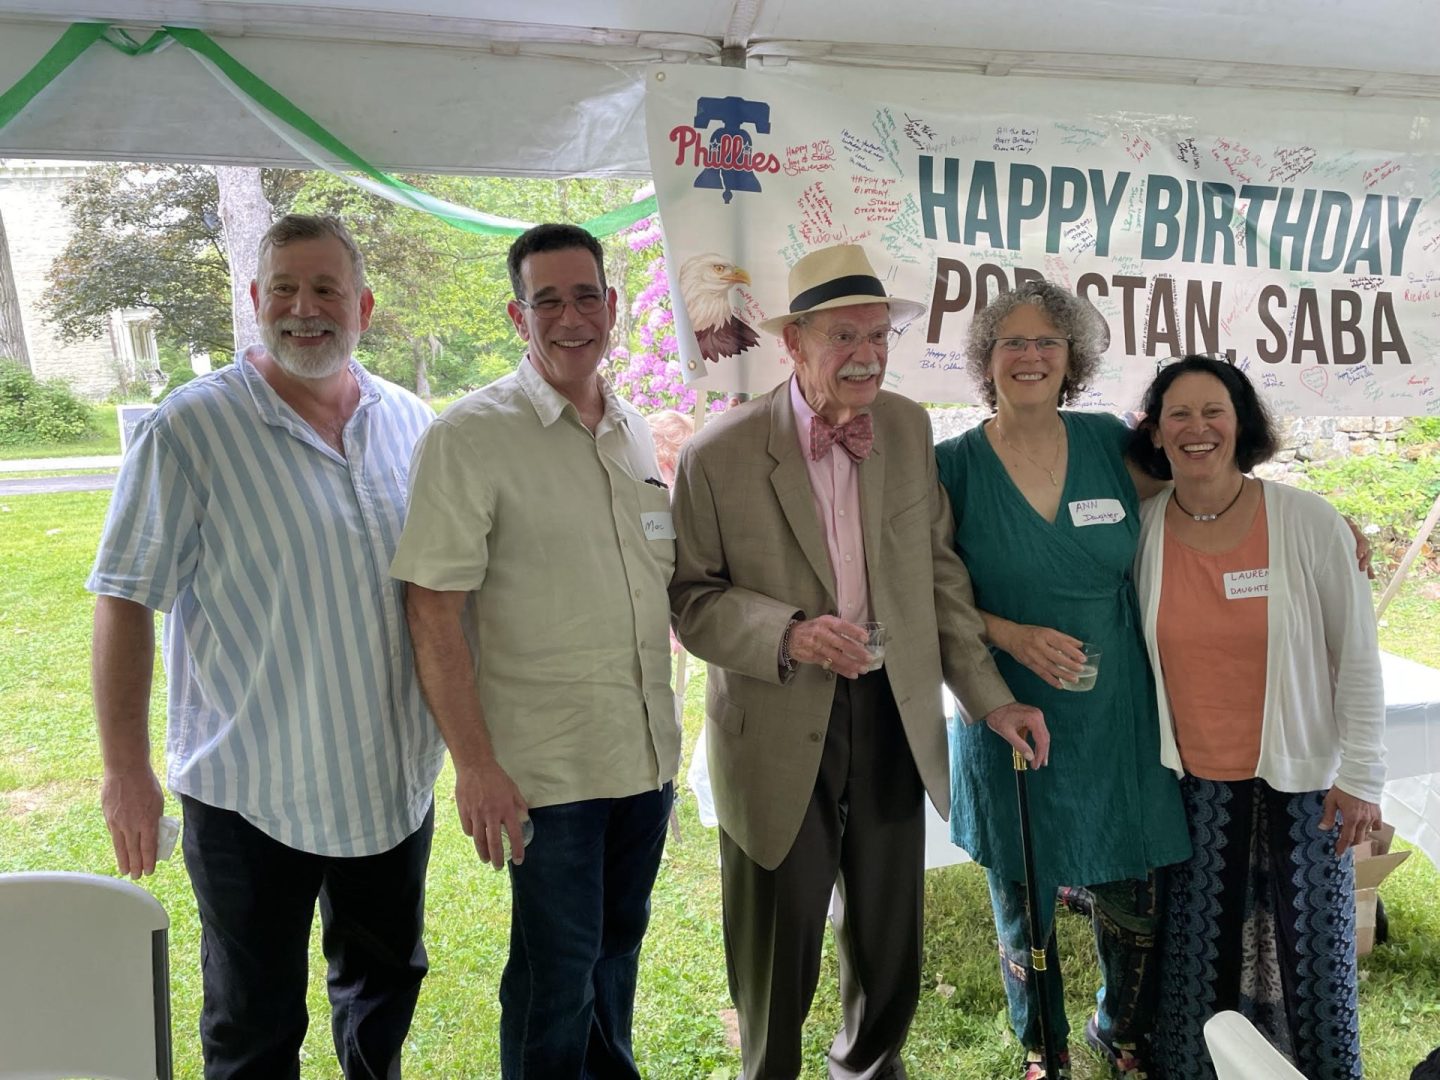 Dr. Lauren Lieberman with her sister, dad, and two brothers standing in front of a happy birthday pop Stan banner, smiling at the camera with arms around each other.